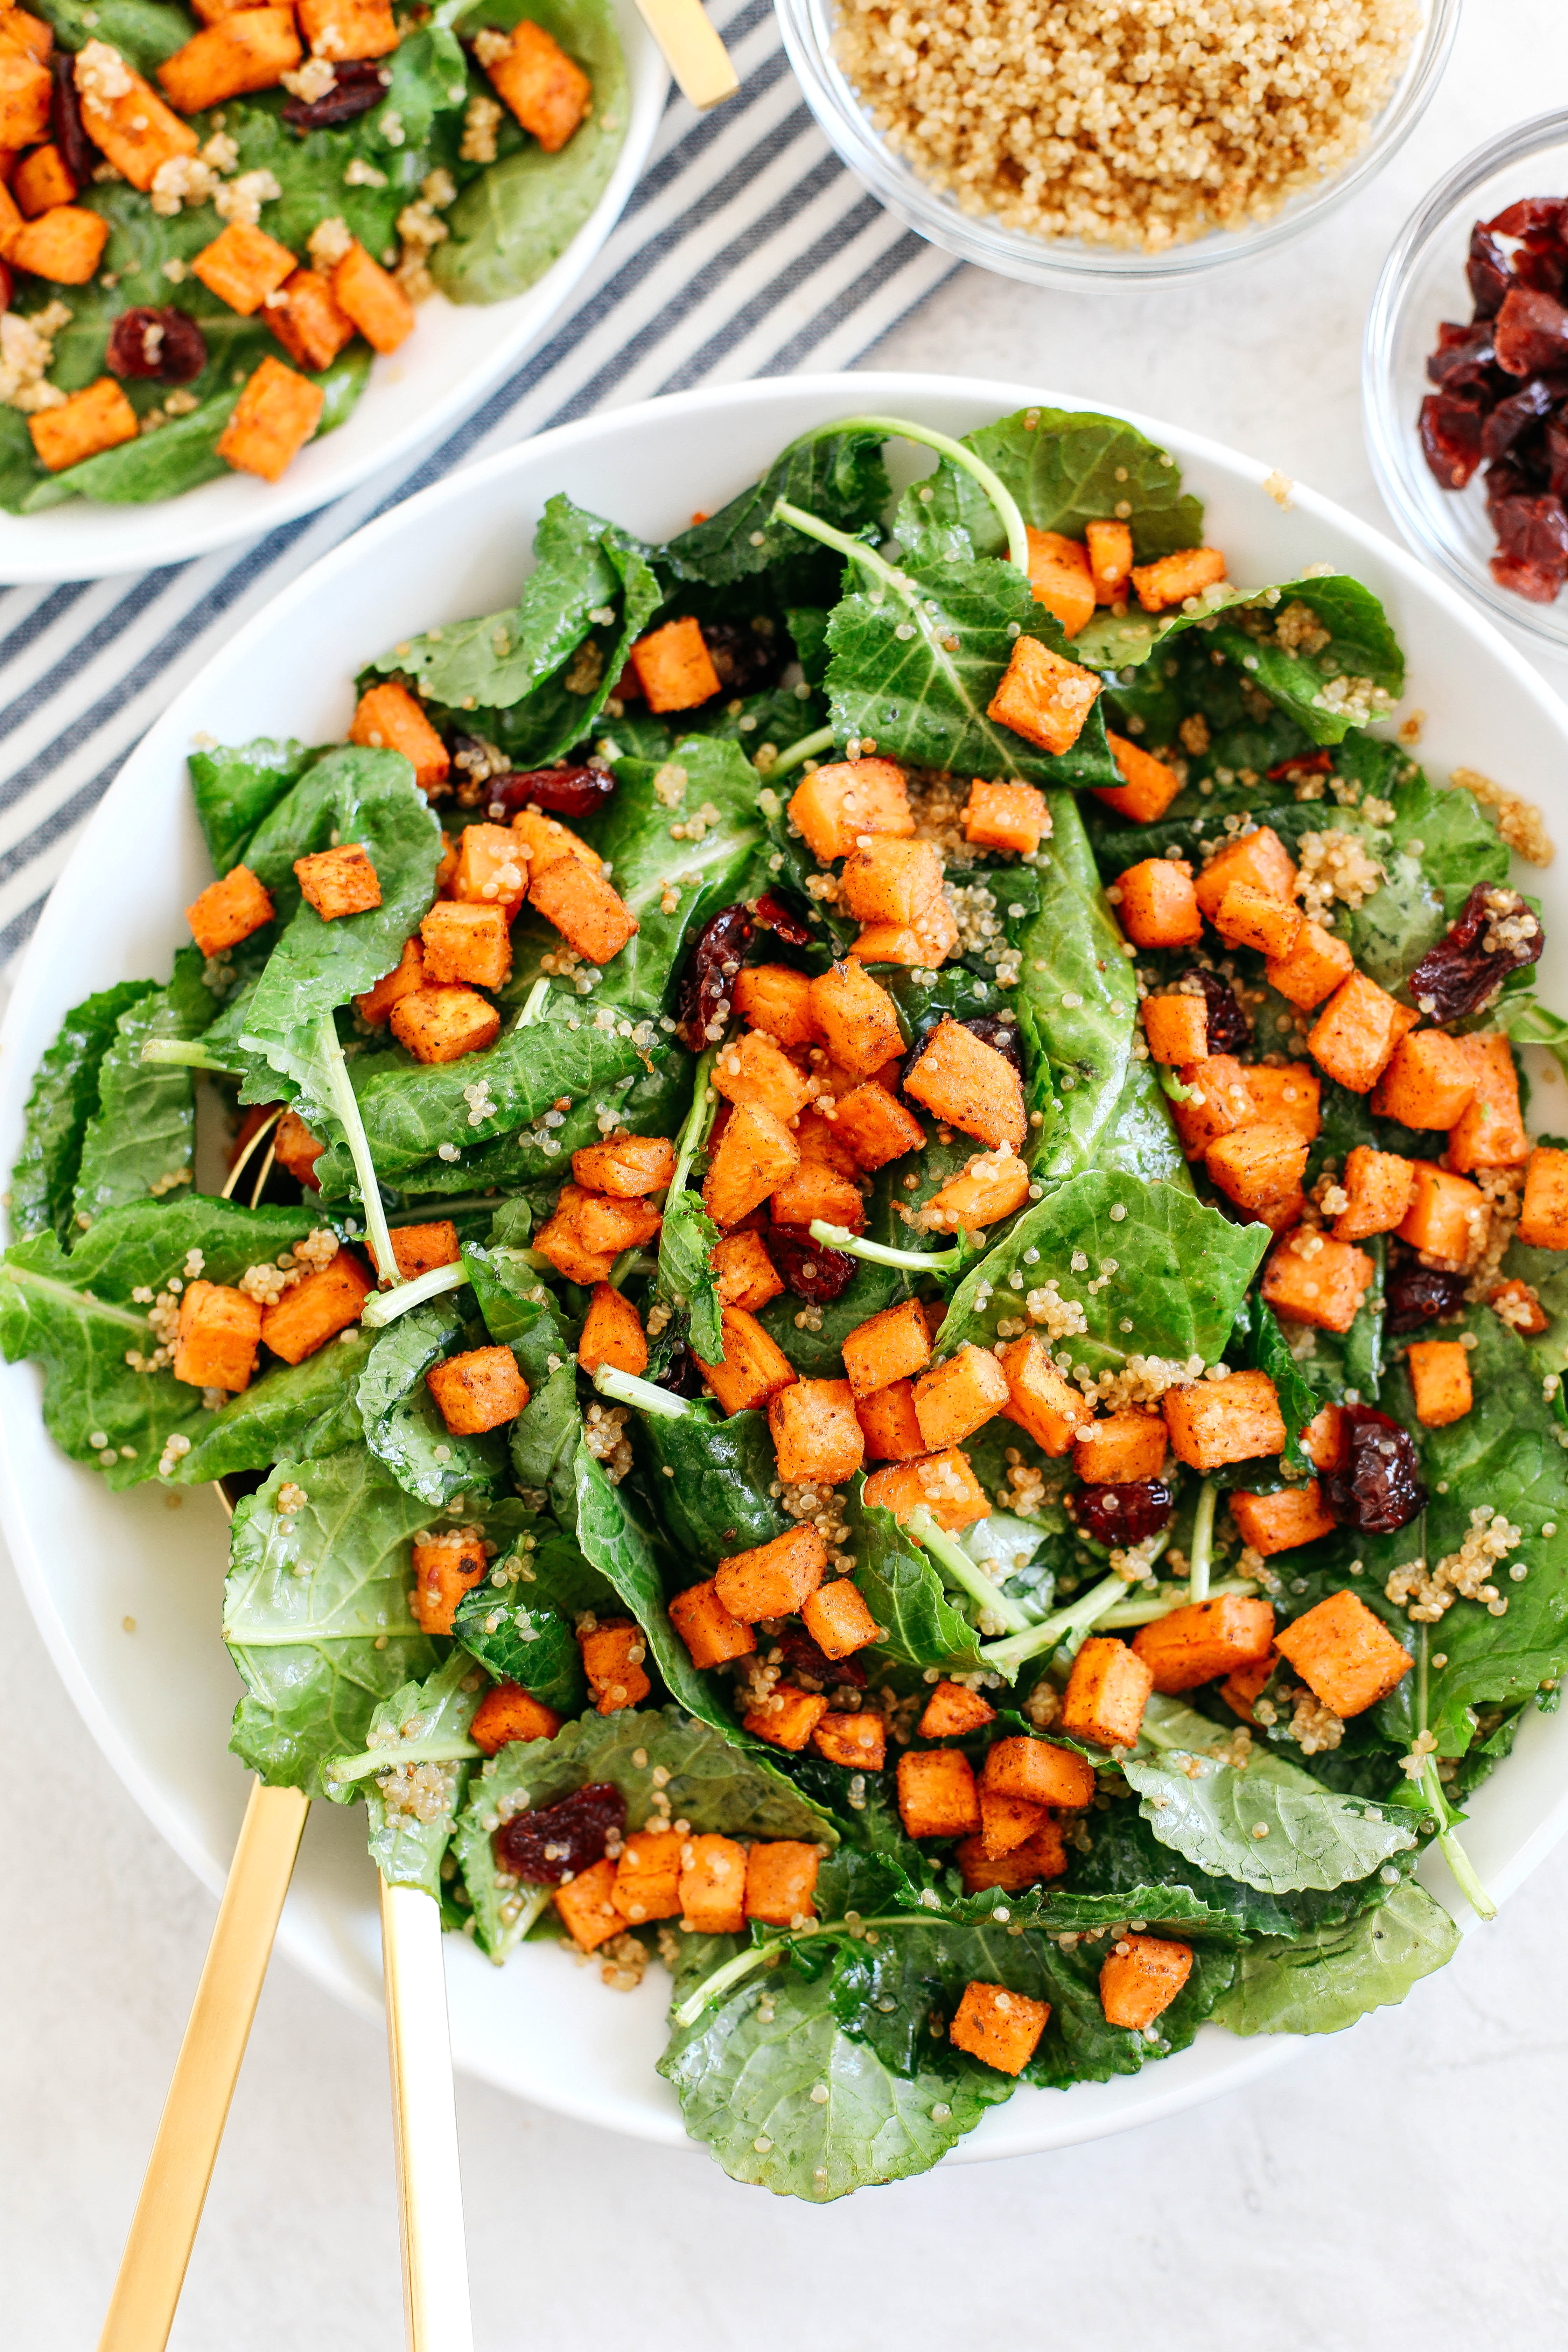 This Roasted Sweet Potato, Quinoa and Kale Salad has all of my favorite ingredients in ONE single dish!  Perfect for lunches or an easy weeknight dinner! 